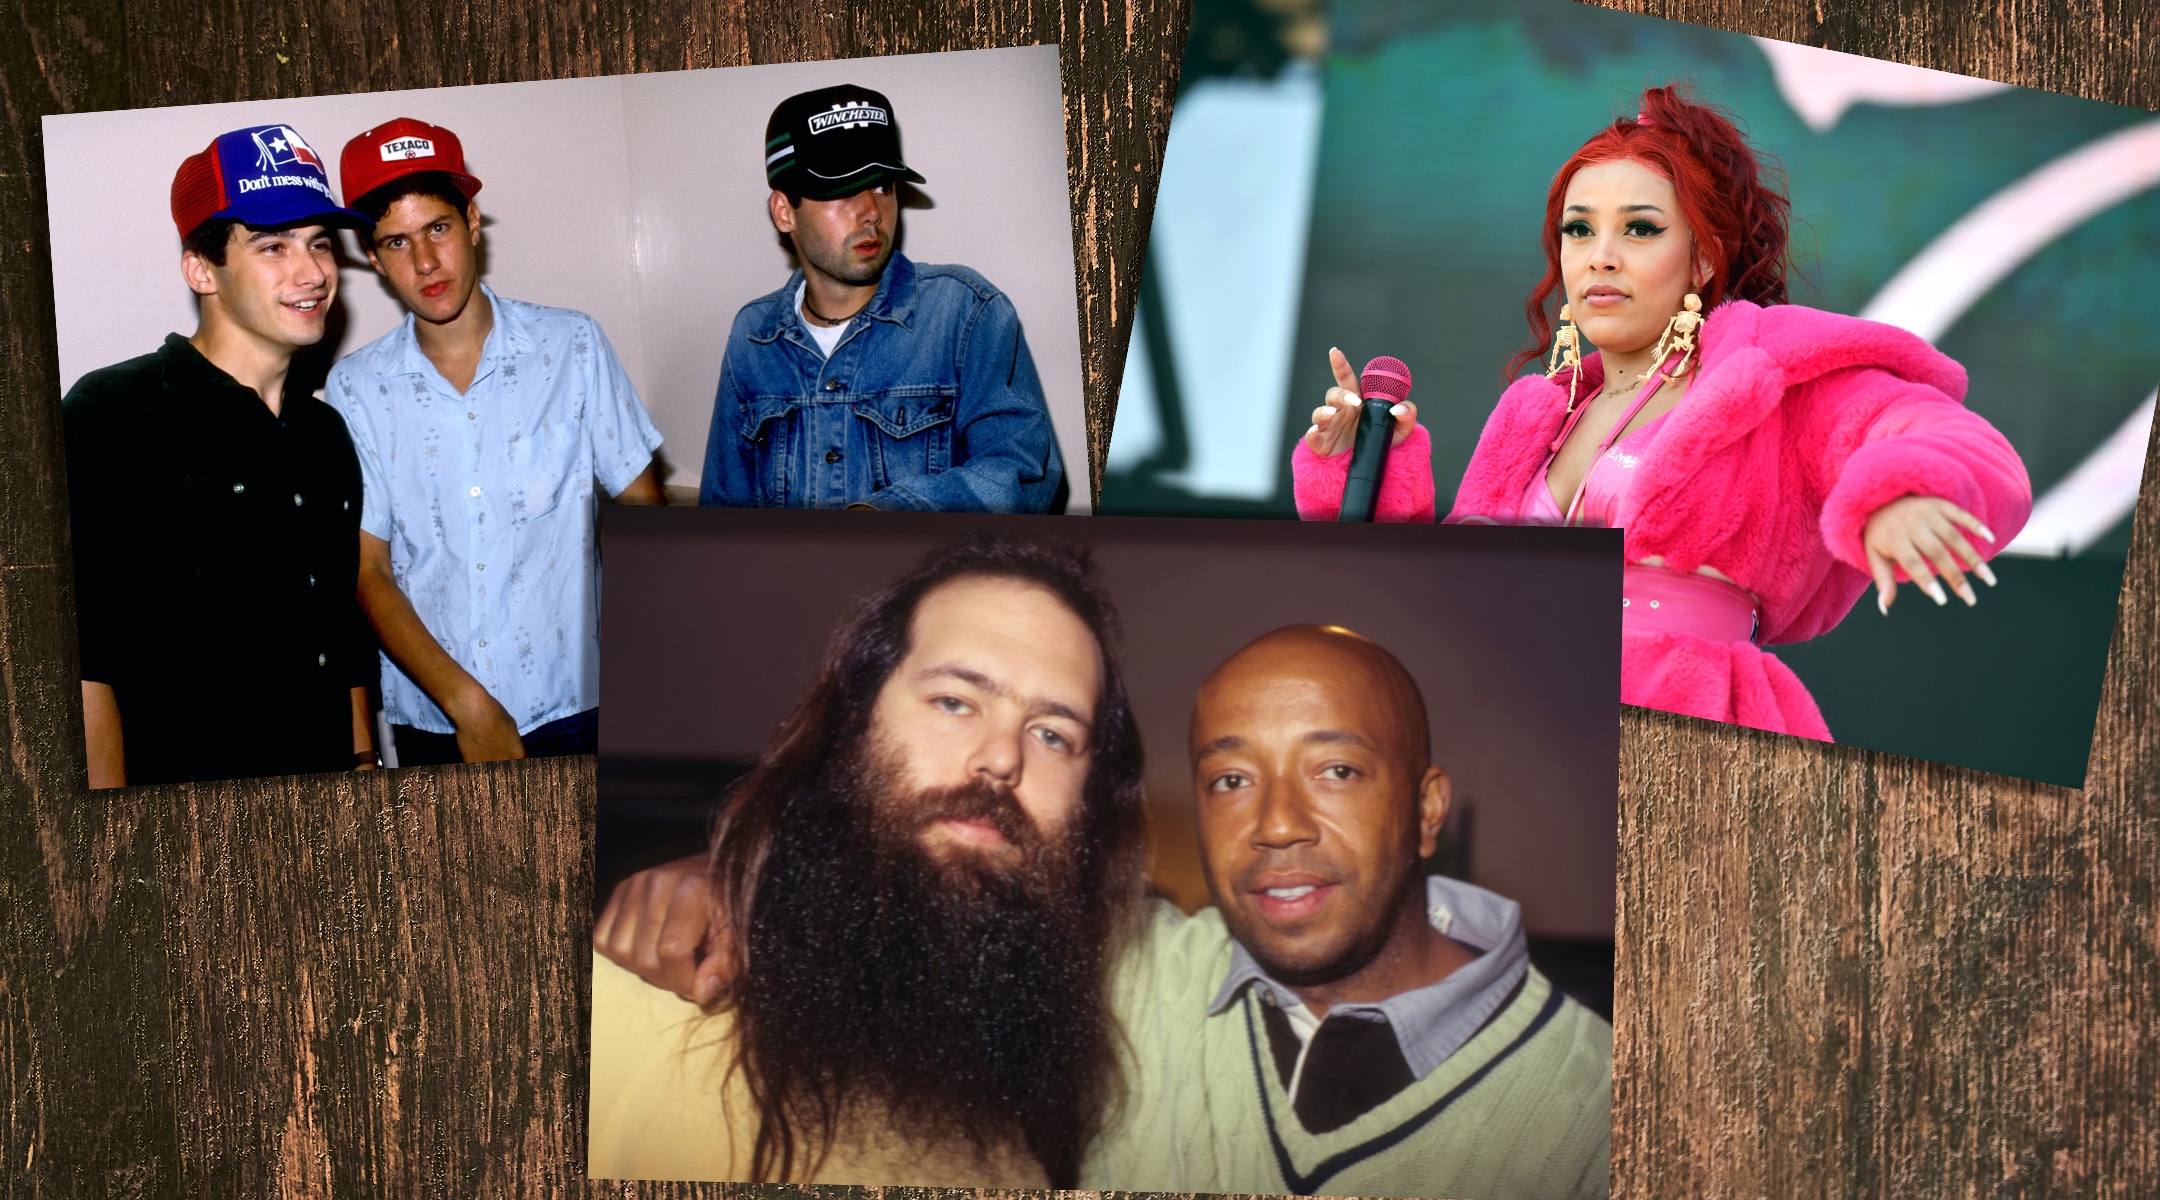 Clockwise from top left: The Beastie Boys, Doja Cat and Rick Rubin, shown with Russell Simmons, are a few of the prominent Jewish figures from the first 50 years of hip-hop. (Getty Images; Design by Mollie Suss)